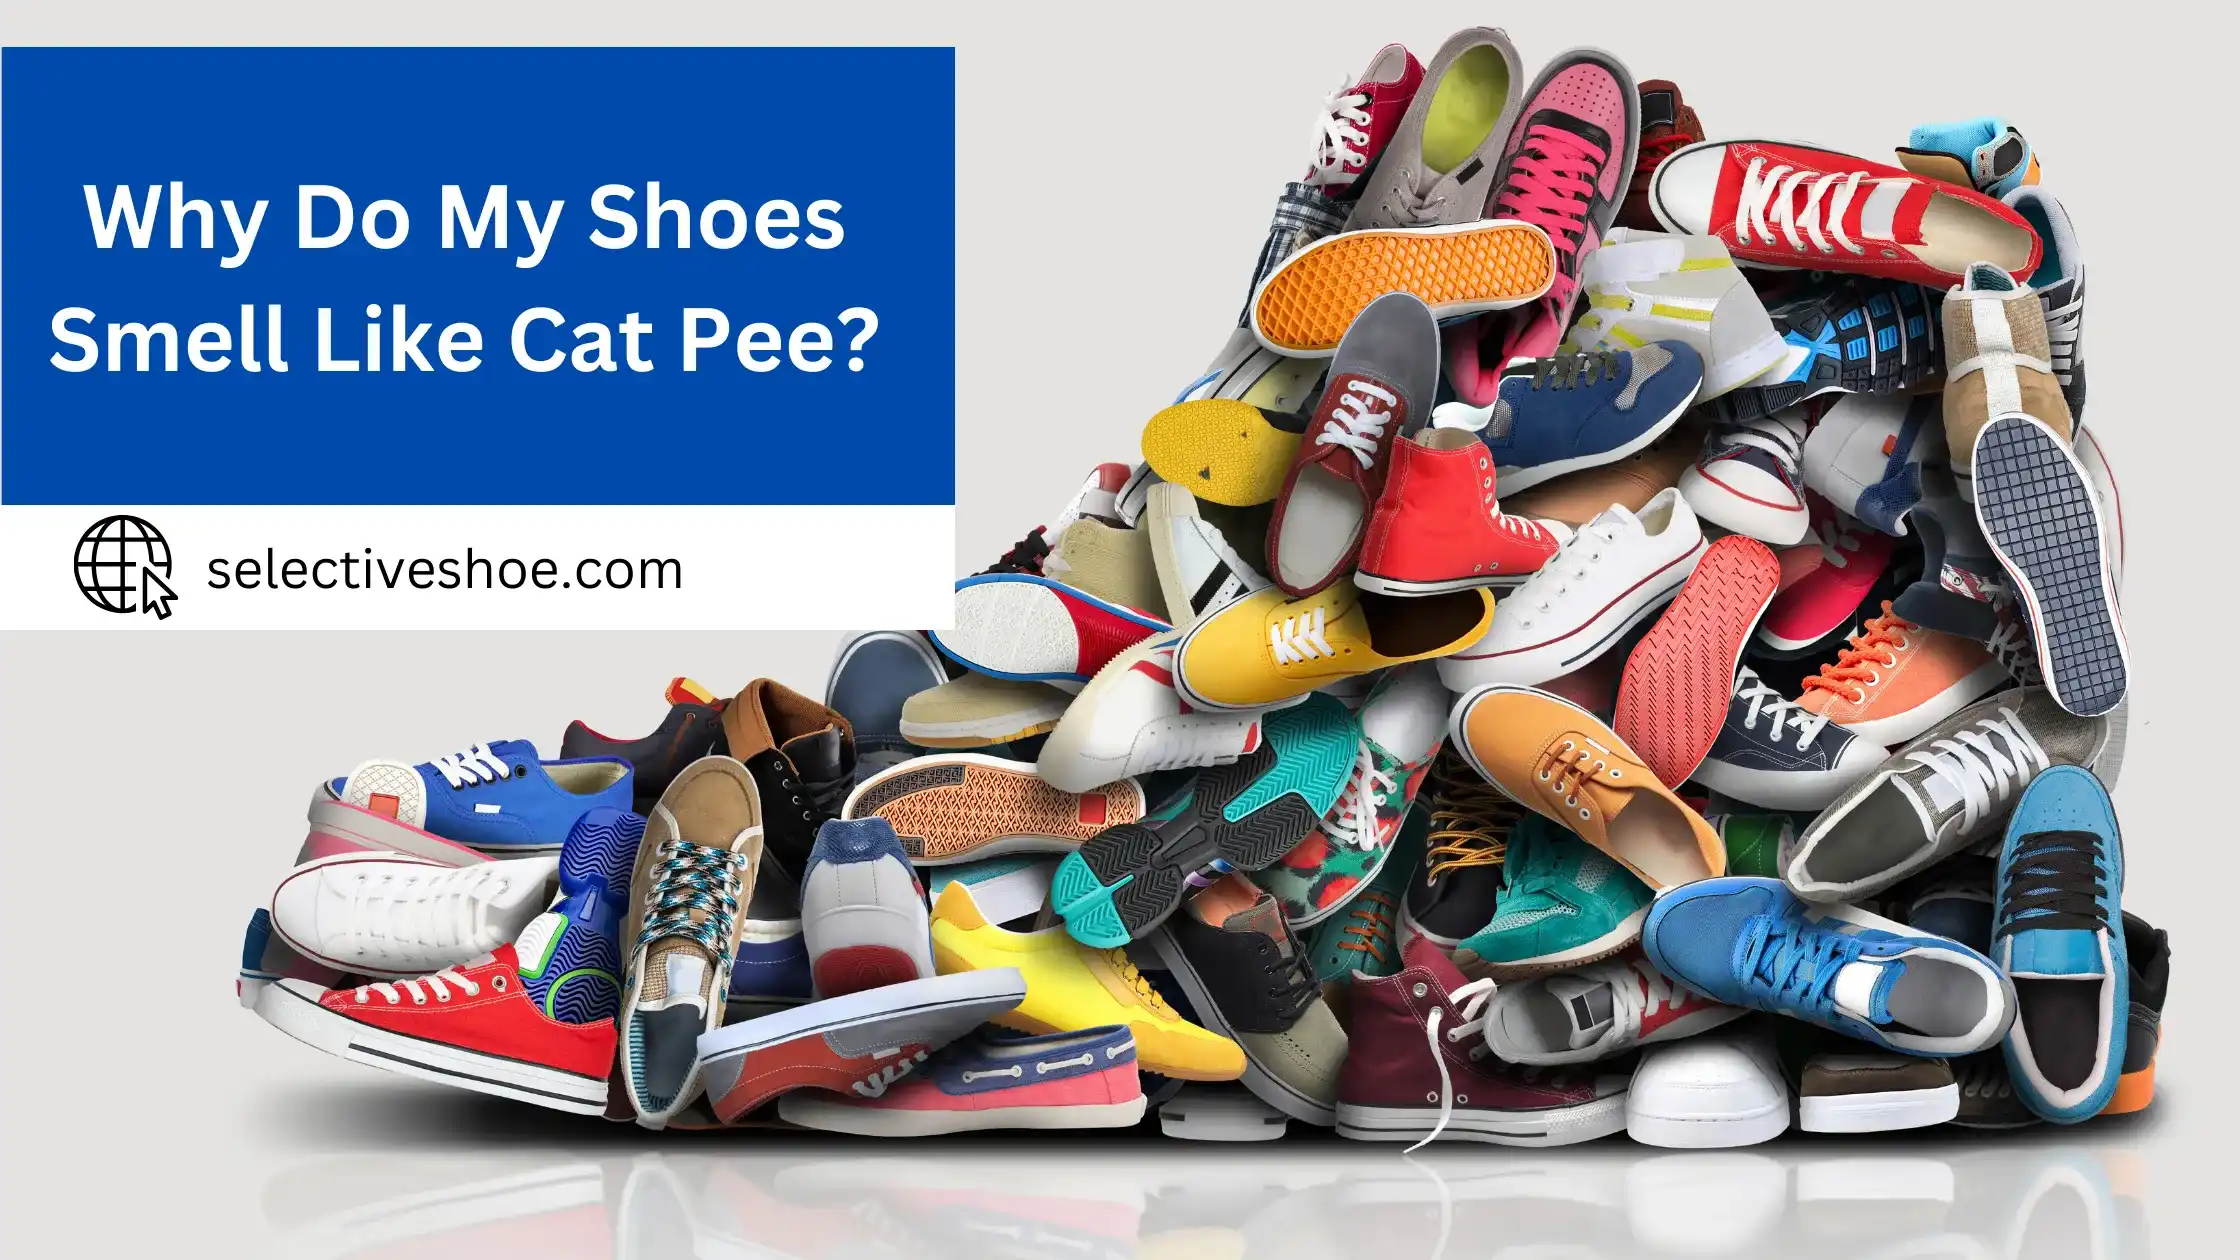 Why Do My Shoes Smell Like Cat Pee? Detailed Information